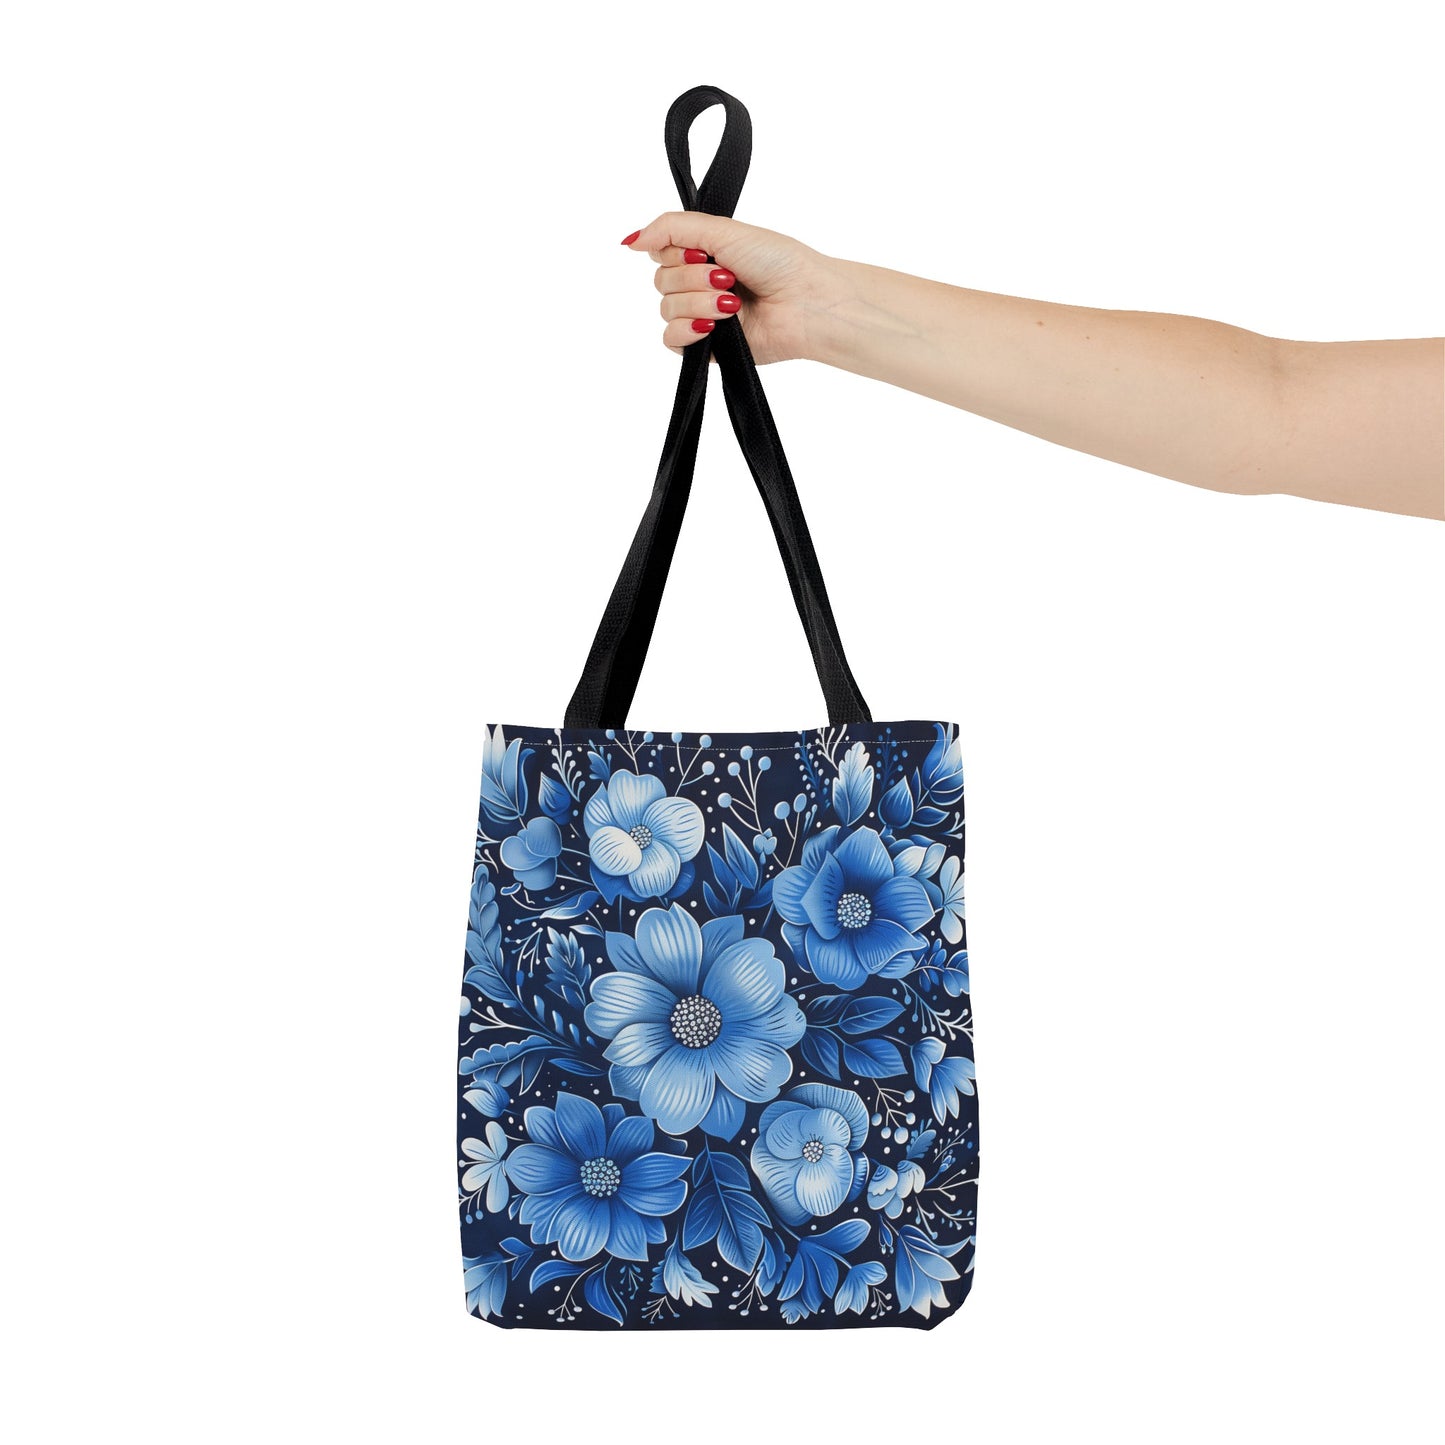 Blue Floral Tote Bag, Navy Flowers Cute Canvas Shopping Small Large Travel Reusable Aesthetic Shoulder Bag Purse